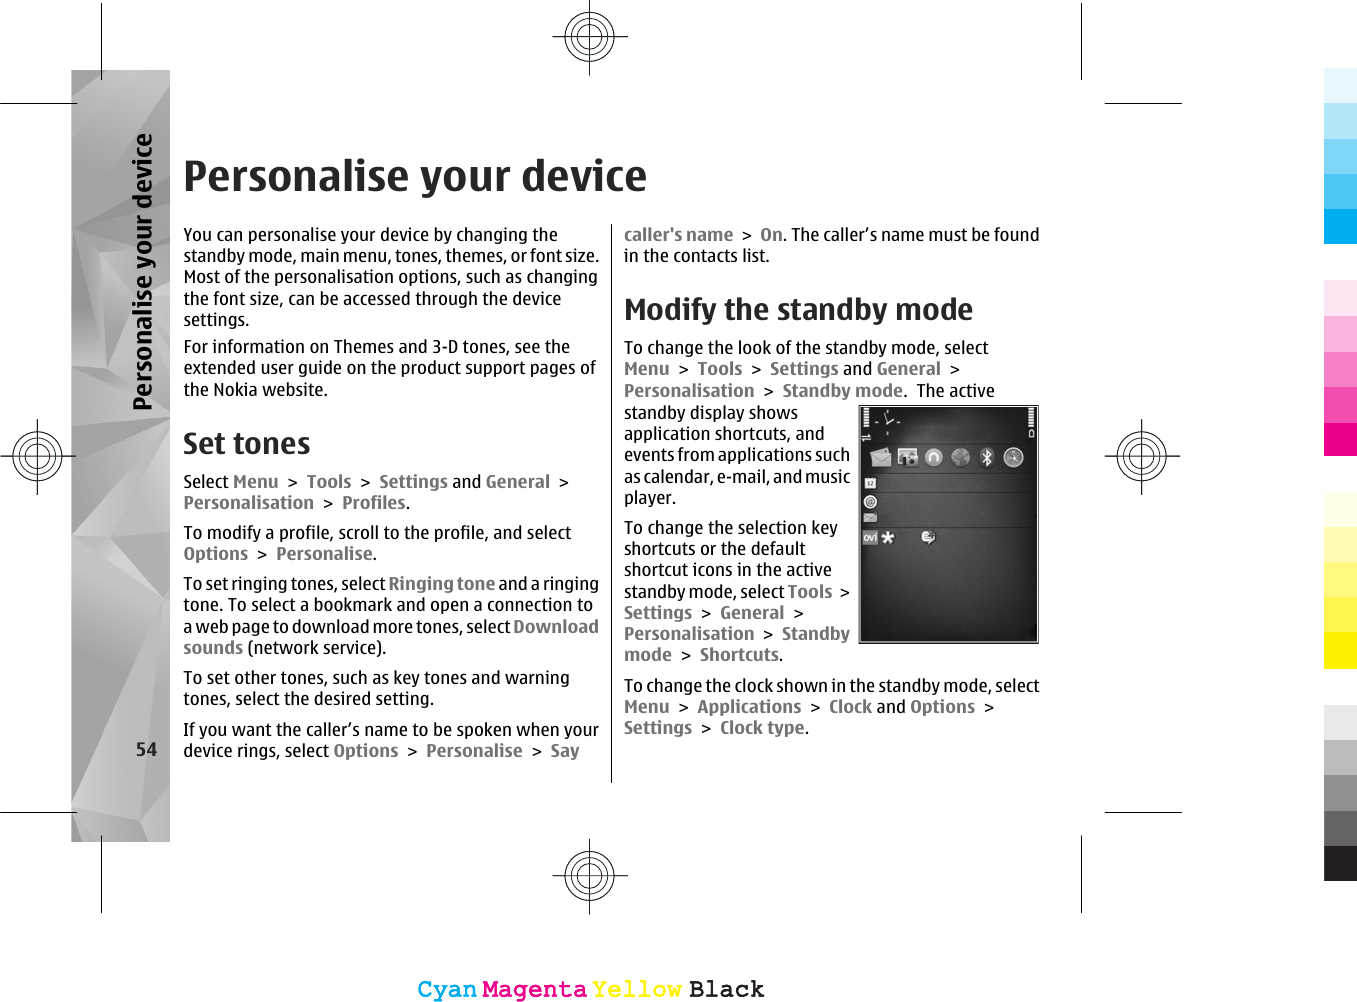 Personalise your deviceYou can personalise your device by changing thestandby mode, main menu, tones, themes, or font size.Most of the personalisation options, such as changingthe font size, can be accessed through the devicesettings.For information on Themes and 3-D tones, see theextended user guide on the product support pages ofthe Nokia website.Set tonesSelect Menu &gt; Tools &gt; Settings and General &gt;Personalisation &gt; Profiles.To modify a profile, scroll to the profile, and selectOptions &gt; Personalise.To set ringing tones, select Ringing tone and a ringingtone. To select a bookmark and open a connection toa web page to download more tones, select Downloadsounds (network service).To set other tones, such as key tones and warningtones, select the desired setting.If you want the caller’s name to be spoken when yourdevice rings, select Options &gt; Personalise &gt; Saycaller&apos;s name &gt; On. The caller’s name must be foundin the contacts list.Modify the standby modeTo change the look of the standby mode, selectMenu &gt; Tools &gt; Settings and General &gt;Personalisation &gt; Standby mode.  The activestandby display showsapplication shortcuts, andevents from applications suchas calendar, e-mail, and musicplayer.To change the selection keyshortcuts or the defaultshortcut icons in the activestandby mode, select Tools &gt;Settings &gt; General &gt;Personalisation &gt; Standbymode &gt; Shortcuts.To change the clock shown in the standby mode, selectMenu &gt; Applications &gt; Clock and Options &gt;Settings &gt; Clock type. 54Personalise your deviceCyanCyanMagentaMagentaYellowYellowBlackBlackCyanCyanMagentaMagentaYellowYellowBlackBlack